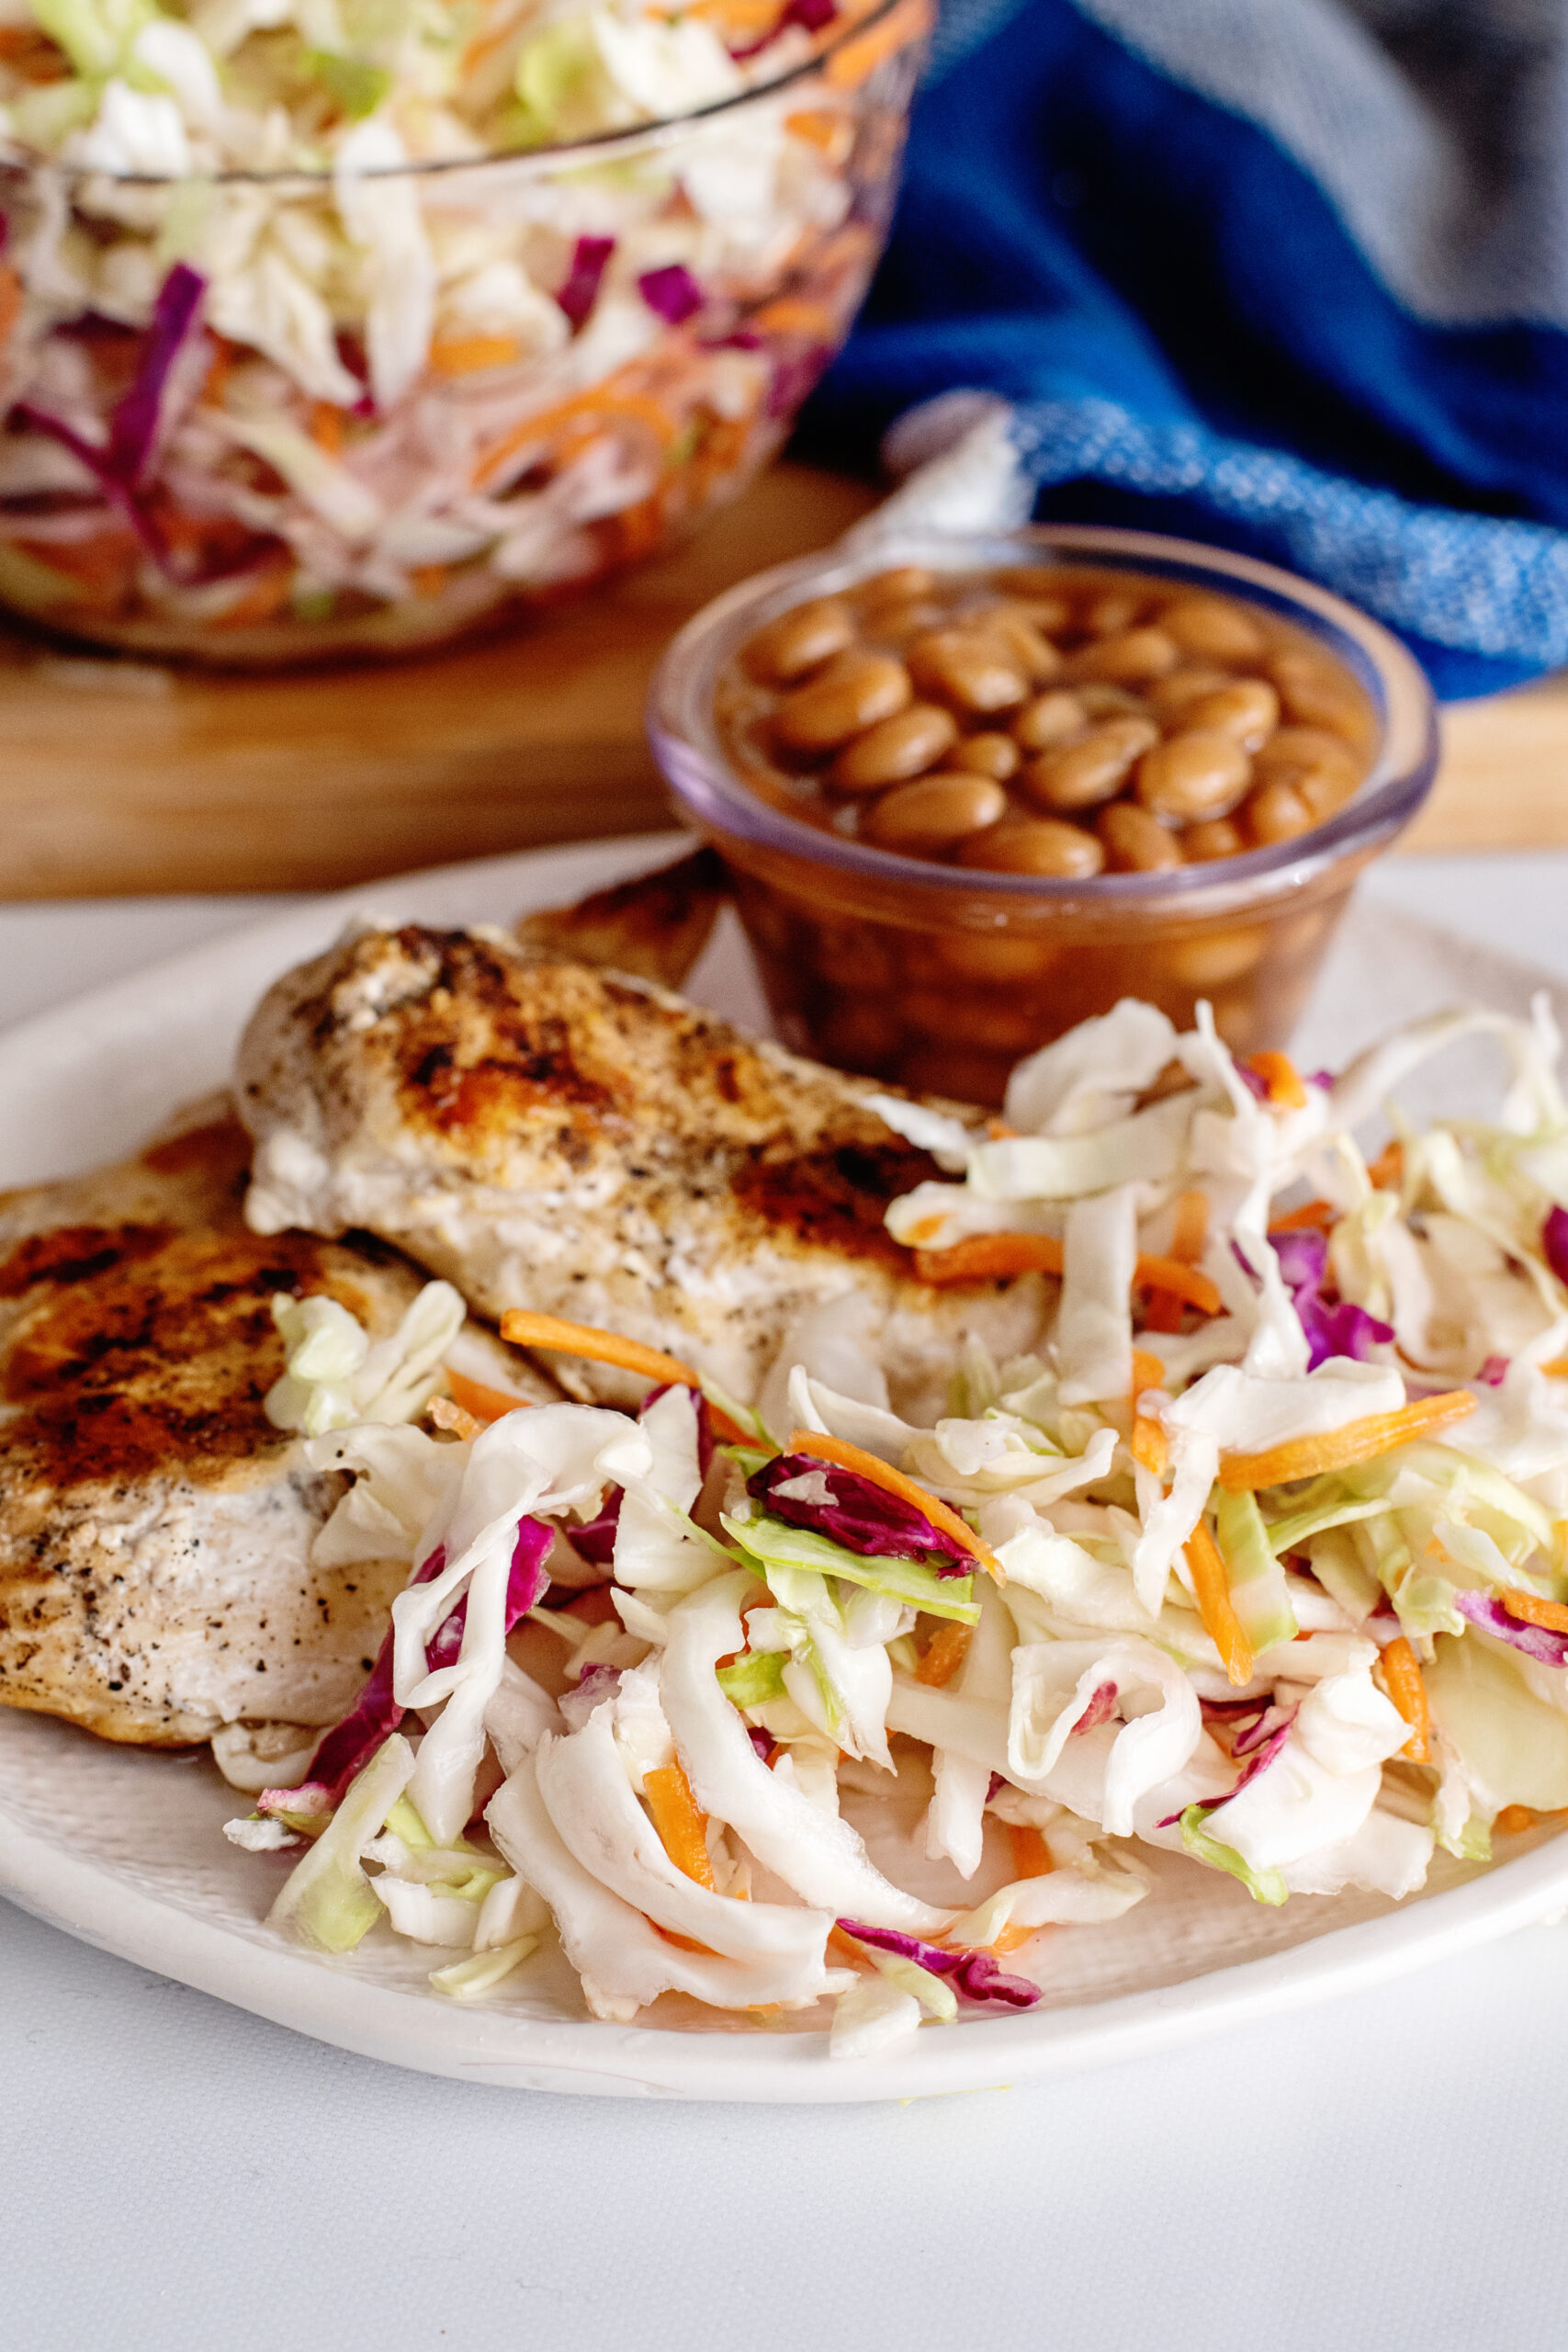 Vinegar slaw on plate with chicken and baked beans.